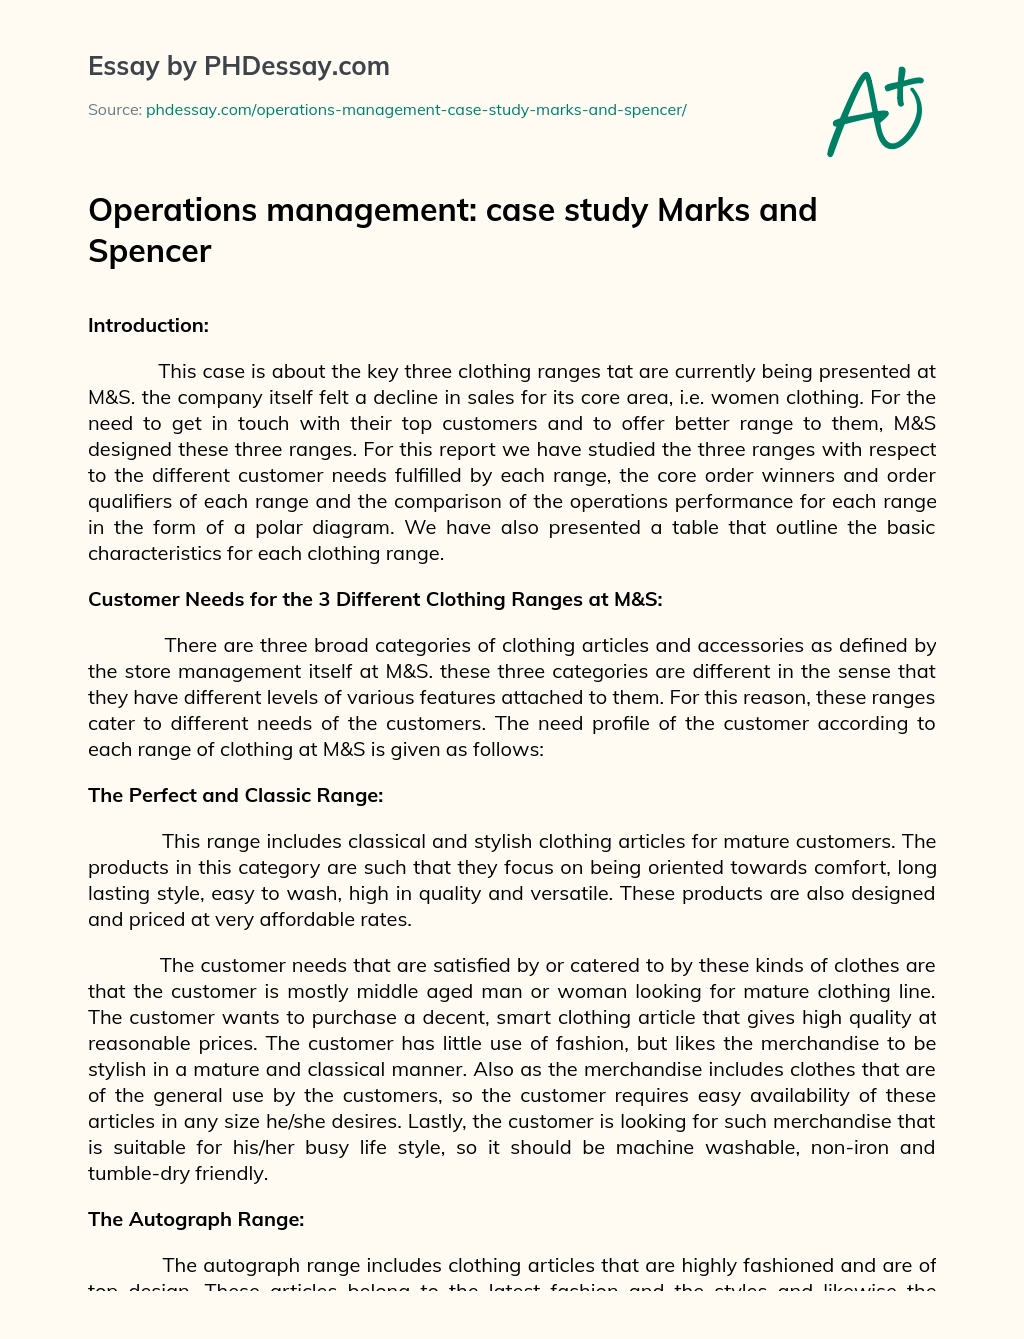 Operations Management: Case Study Marks and Spencer essay